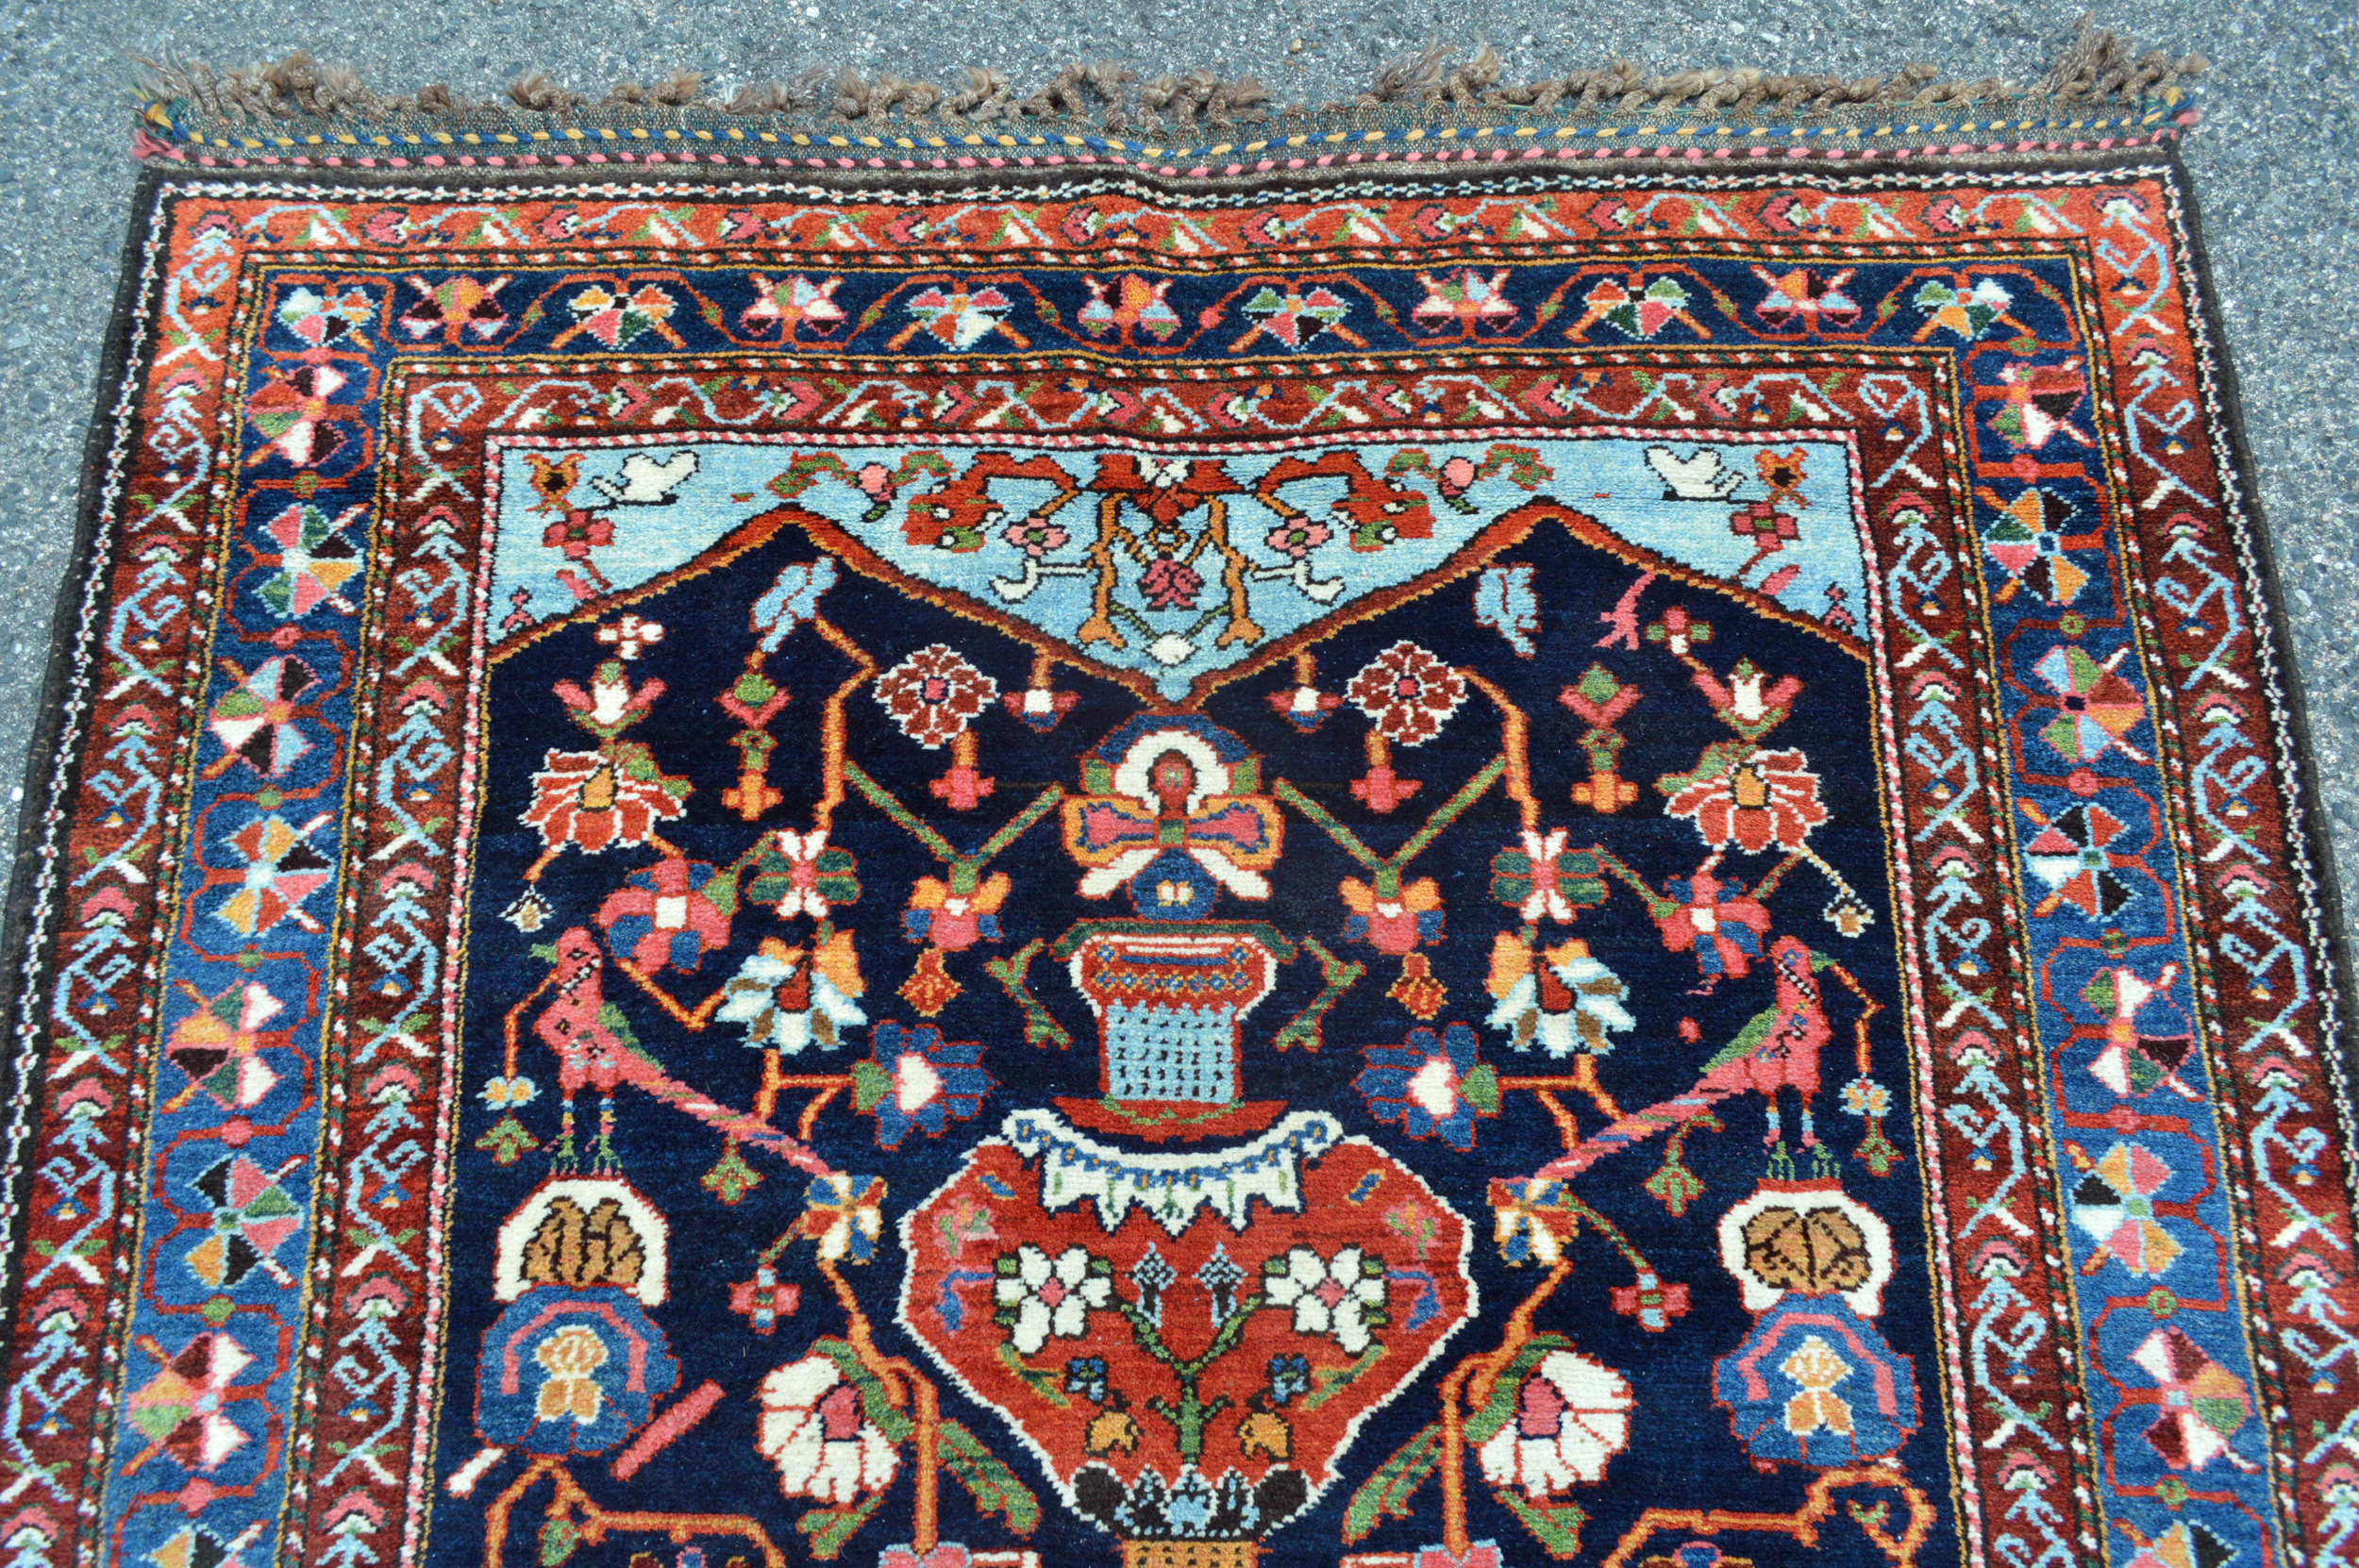 Detail of an antique Persian Bakhtiyari runner with a navy blue field decorated with stylized vases, birds and flowers, Douglas Stock Gallery, antique Oriental runners Boston,MA area